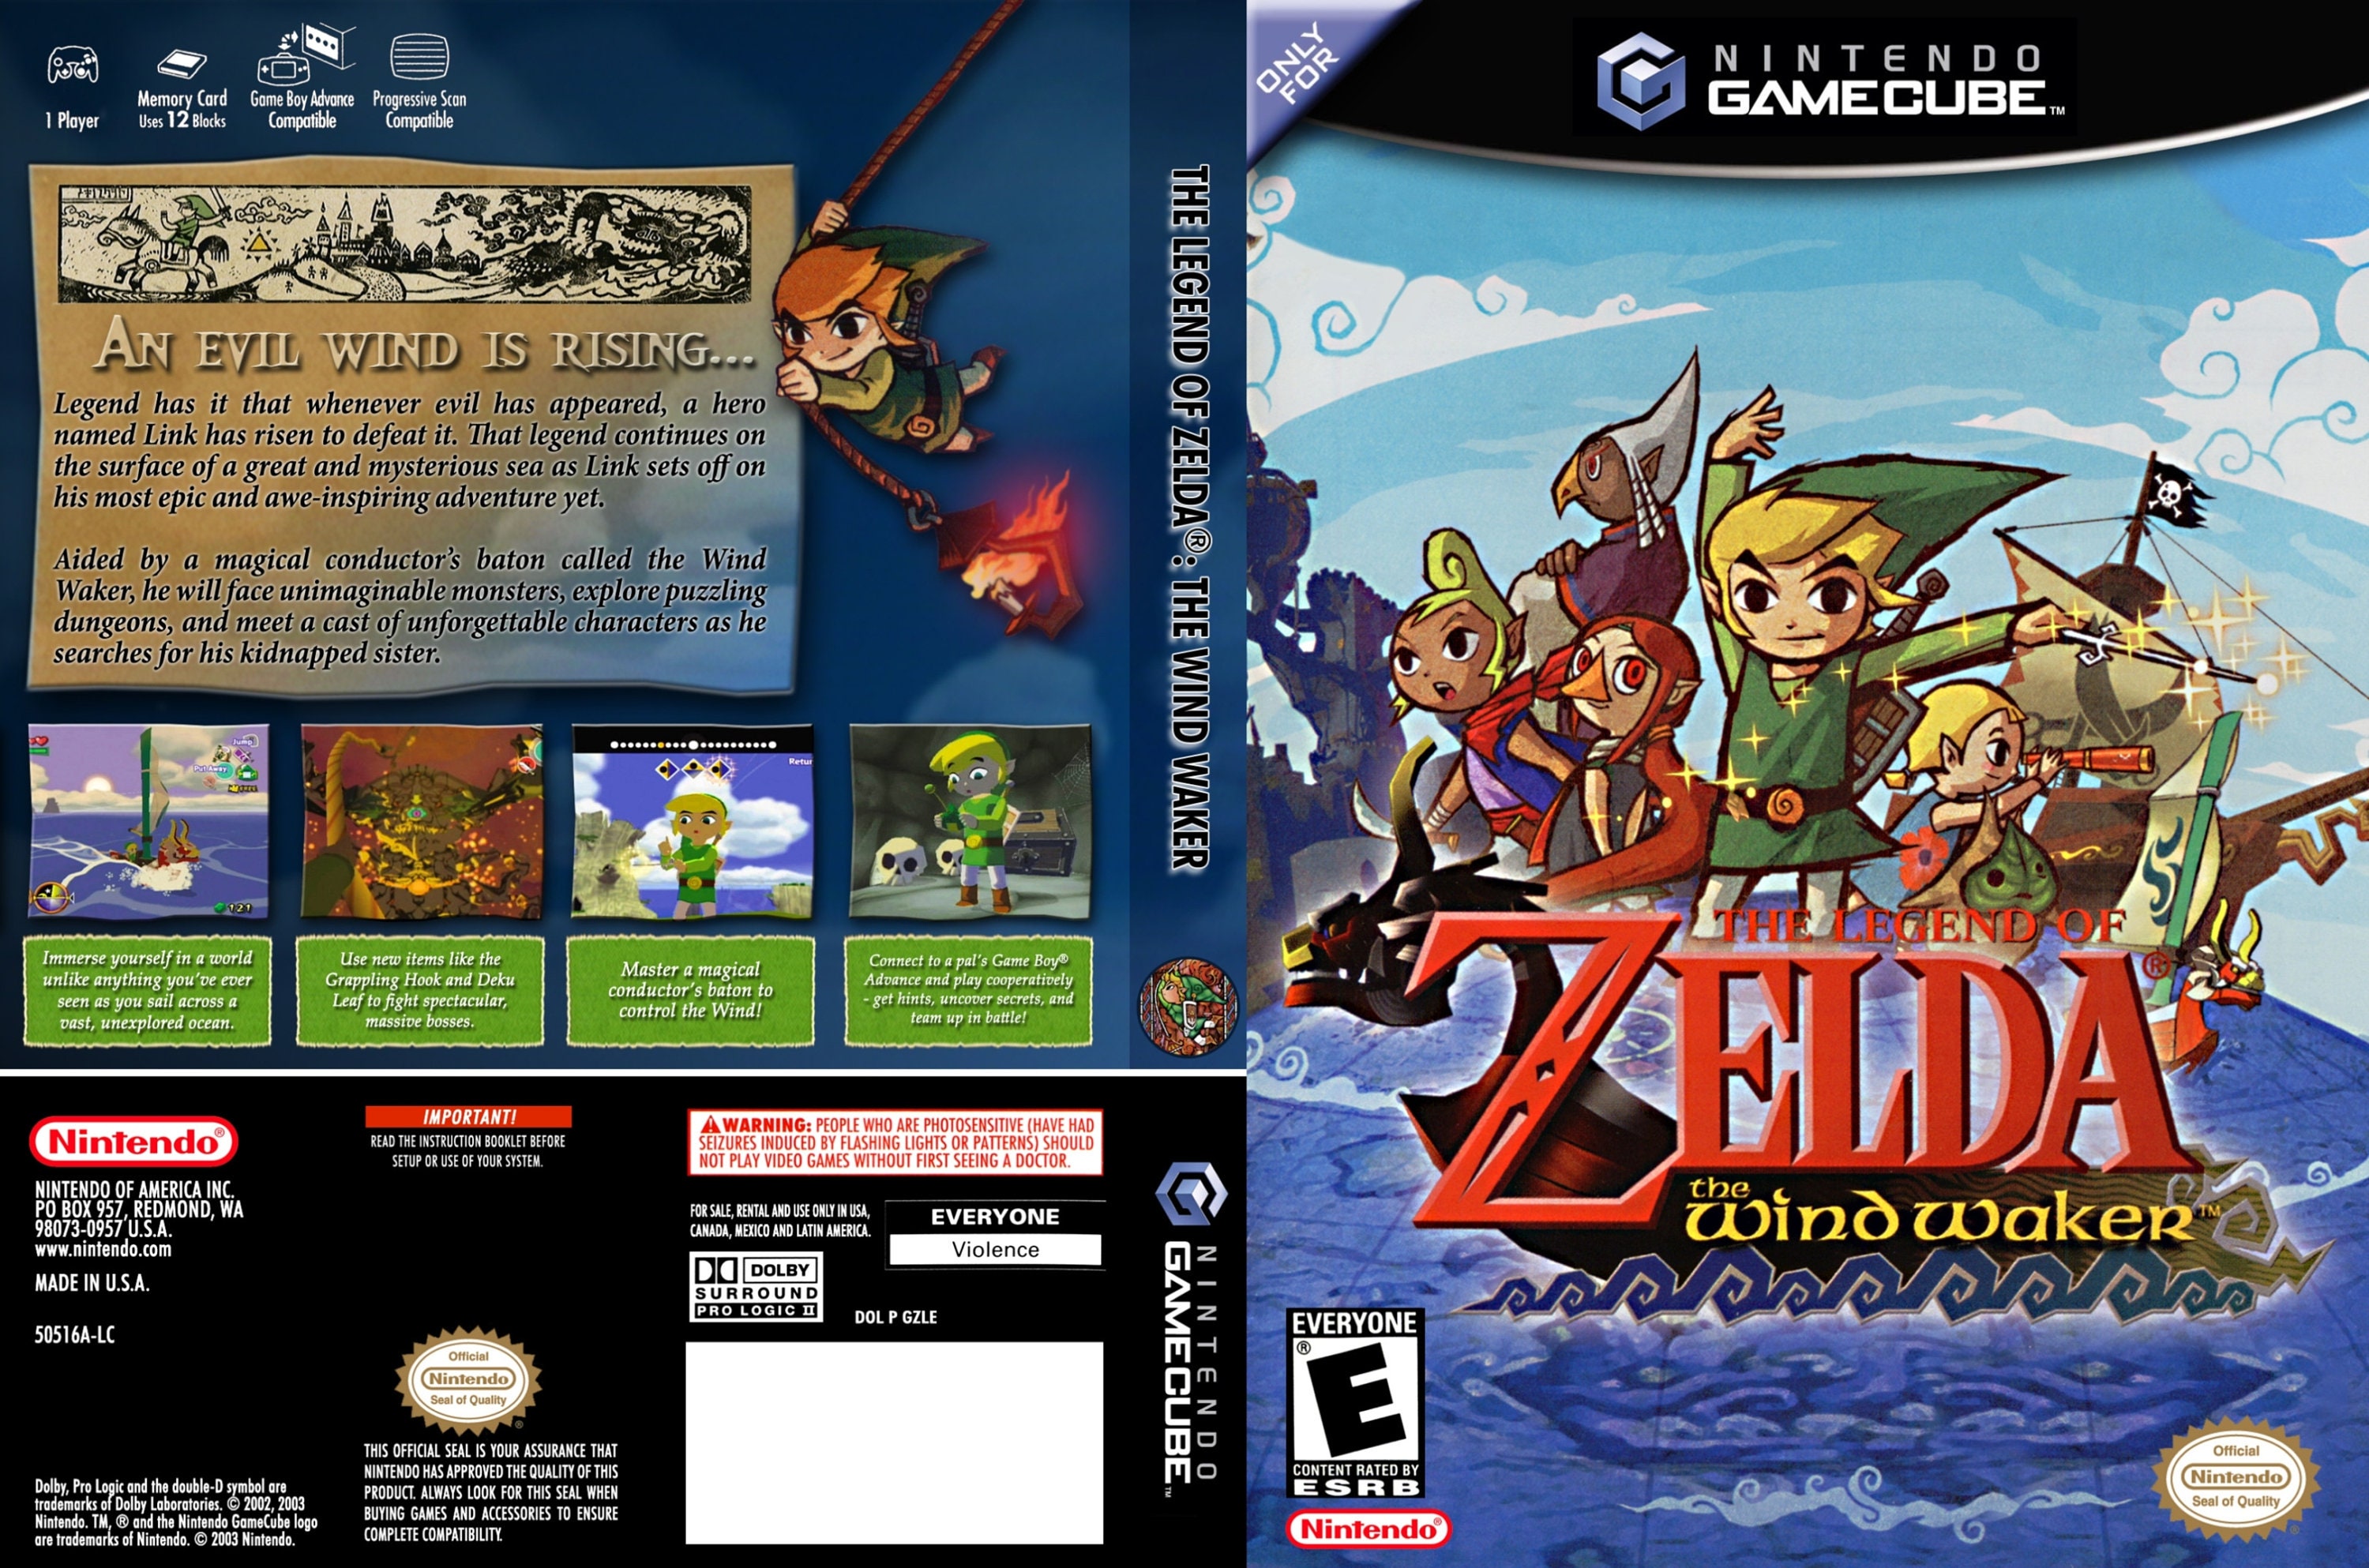 GameCube Replacement Case - NO GAME - Legend of Zelda - The Ocarina of Time